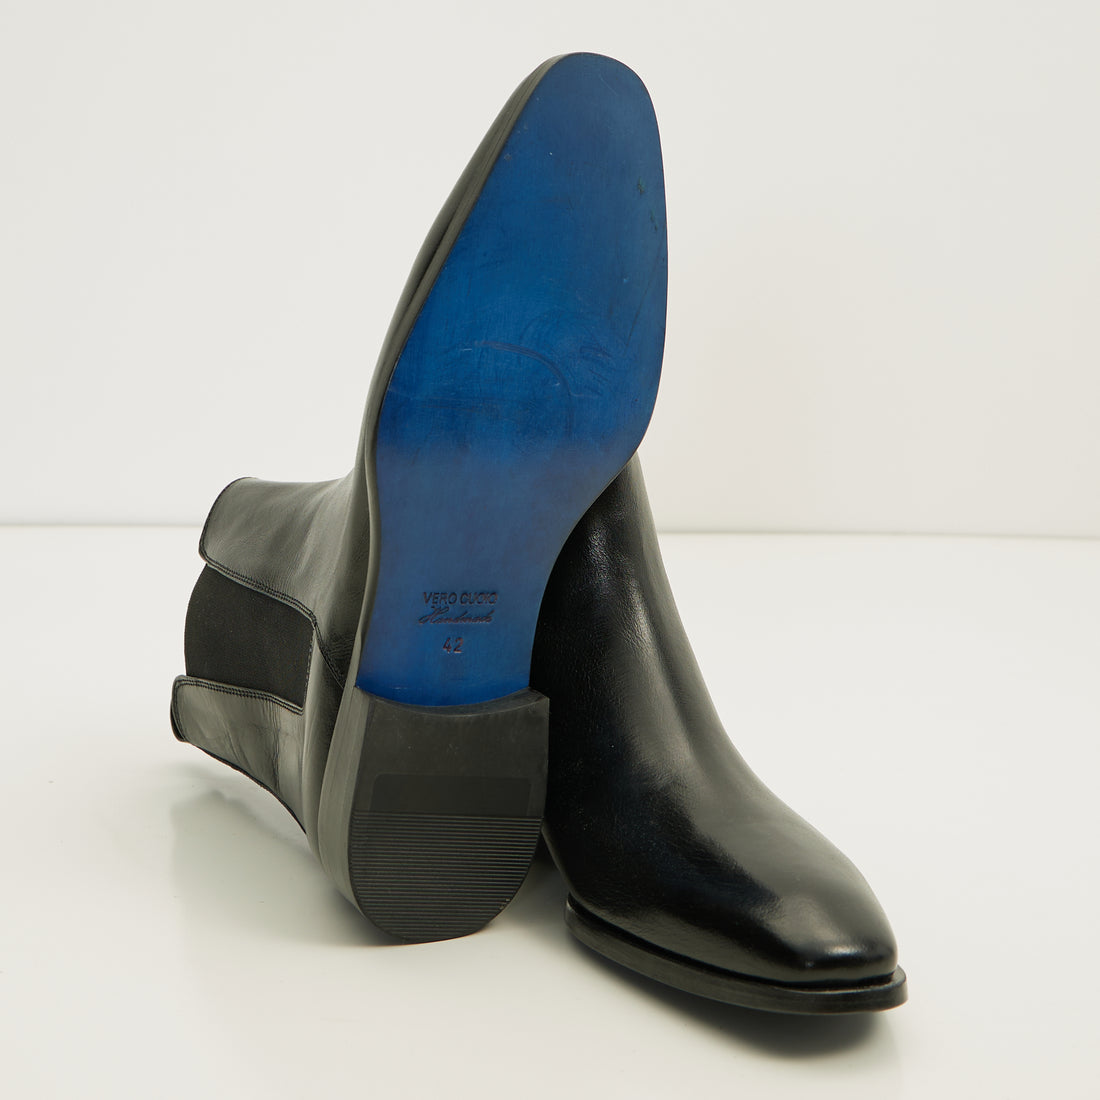 N° D5456 ALL LEATHER ESSENTIAL CHELSEA BOOT  - BLACK BUFFALO